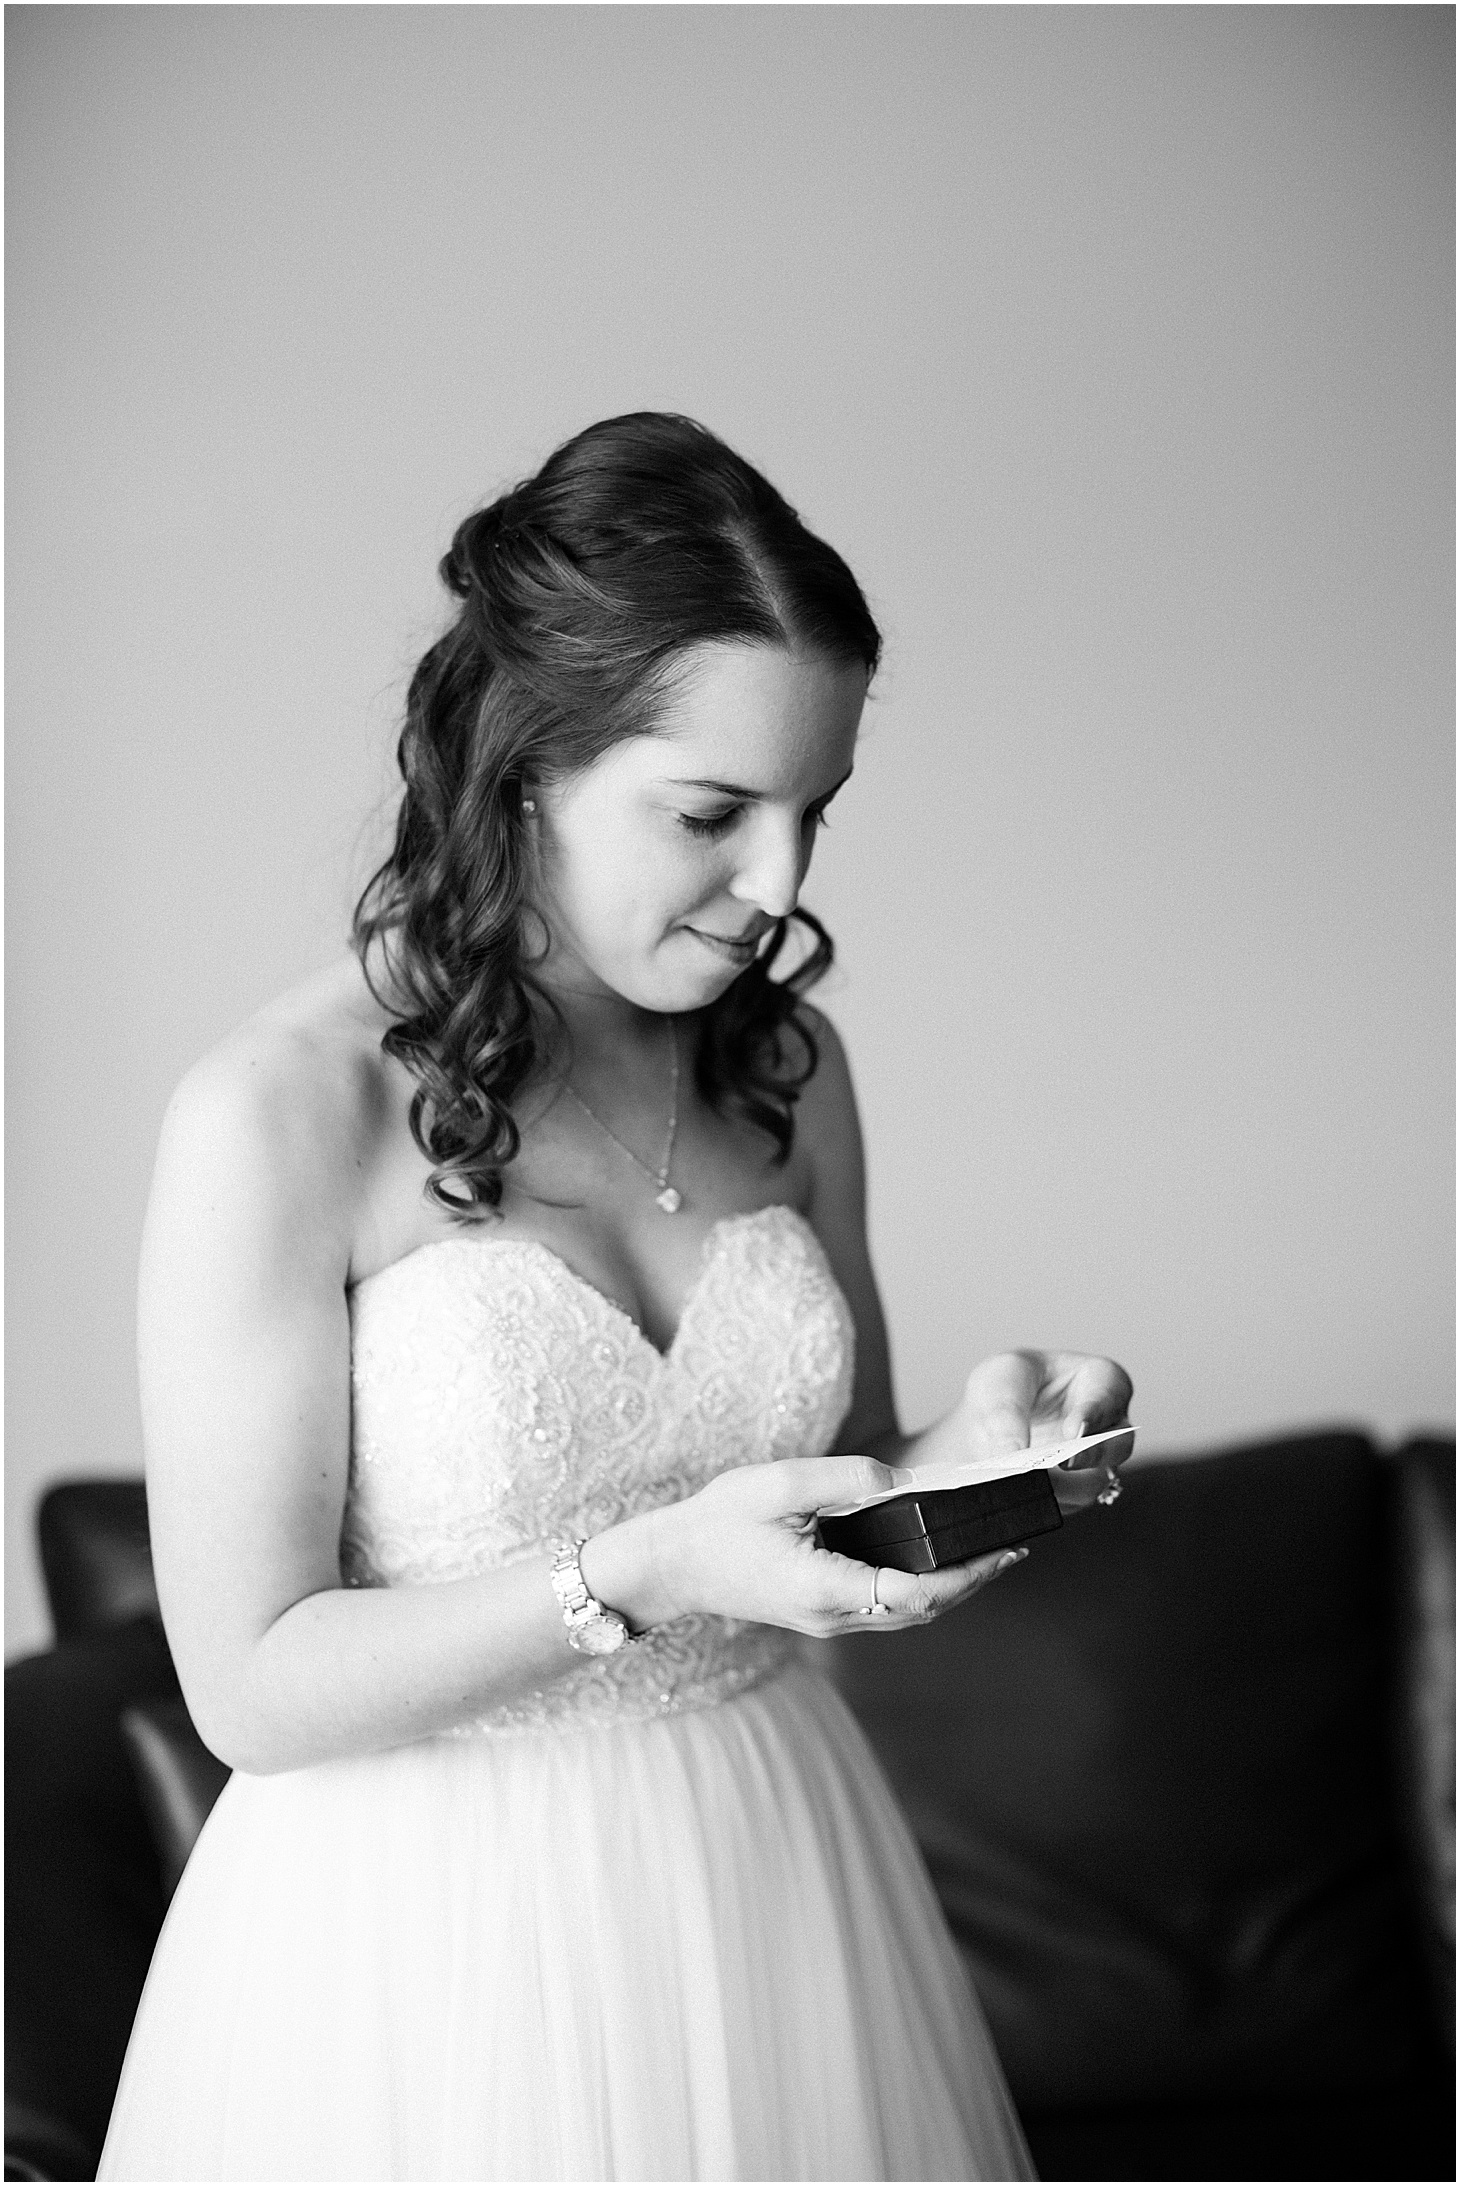 Bride Getting Ready at Kimpton Donovan Hotel, Dusty Blue and Pink Jewish Wedding at Women in the Arts, Sarah Bradshaw Photography, DC Wedding Photographer 